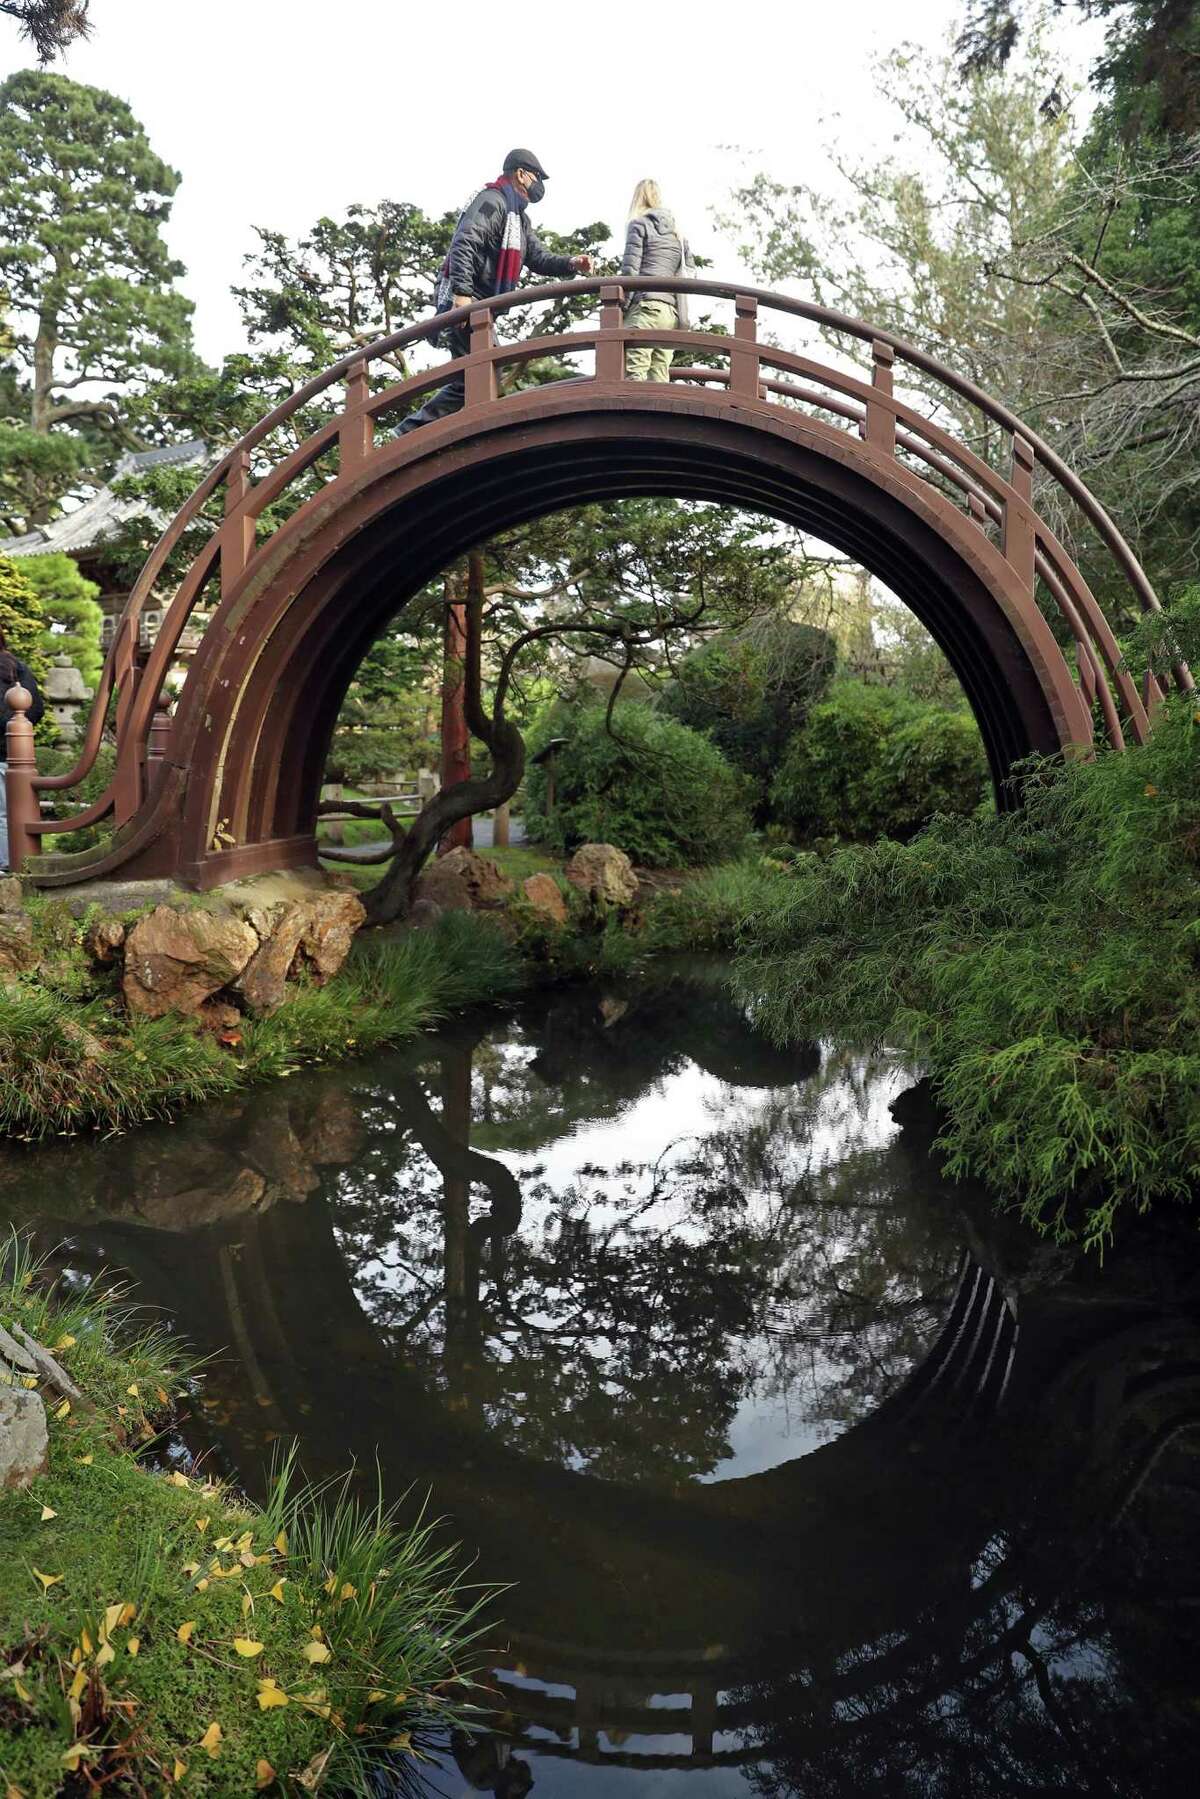 The arched drum bridge at the Japanese Tea Garden, which features pagodas, stone lanterns, stepping stone paths, koi ponds, a zen garden and cherry blossom trees that bloom in spring.